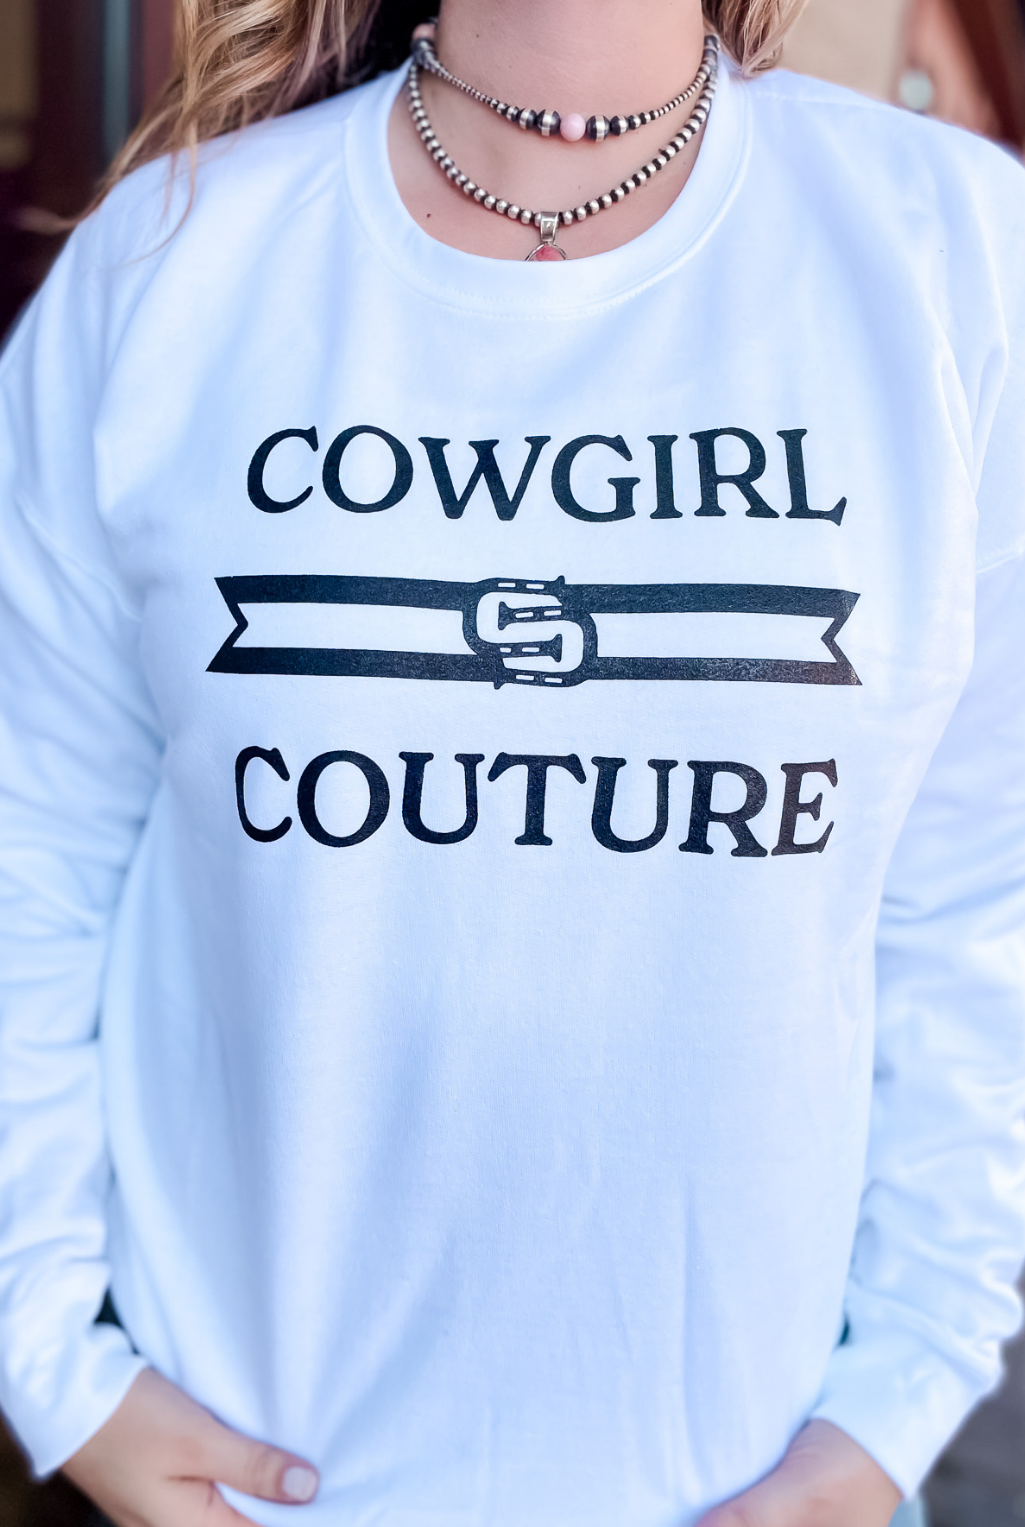 Cowgirl Couture Sweatshirt